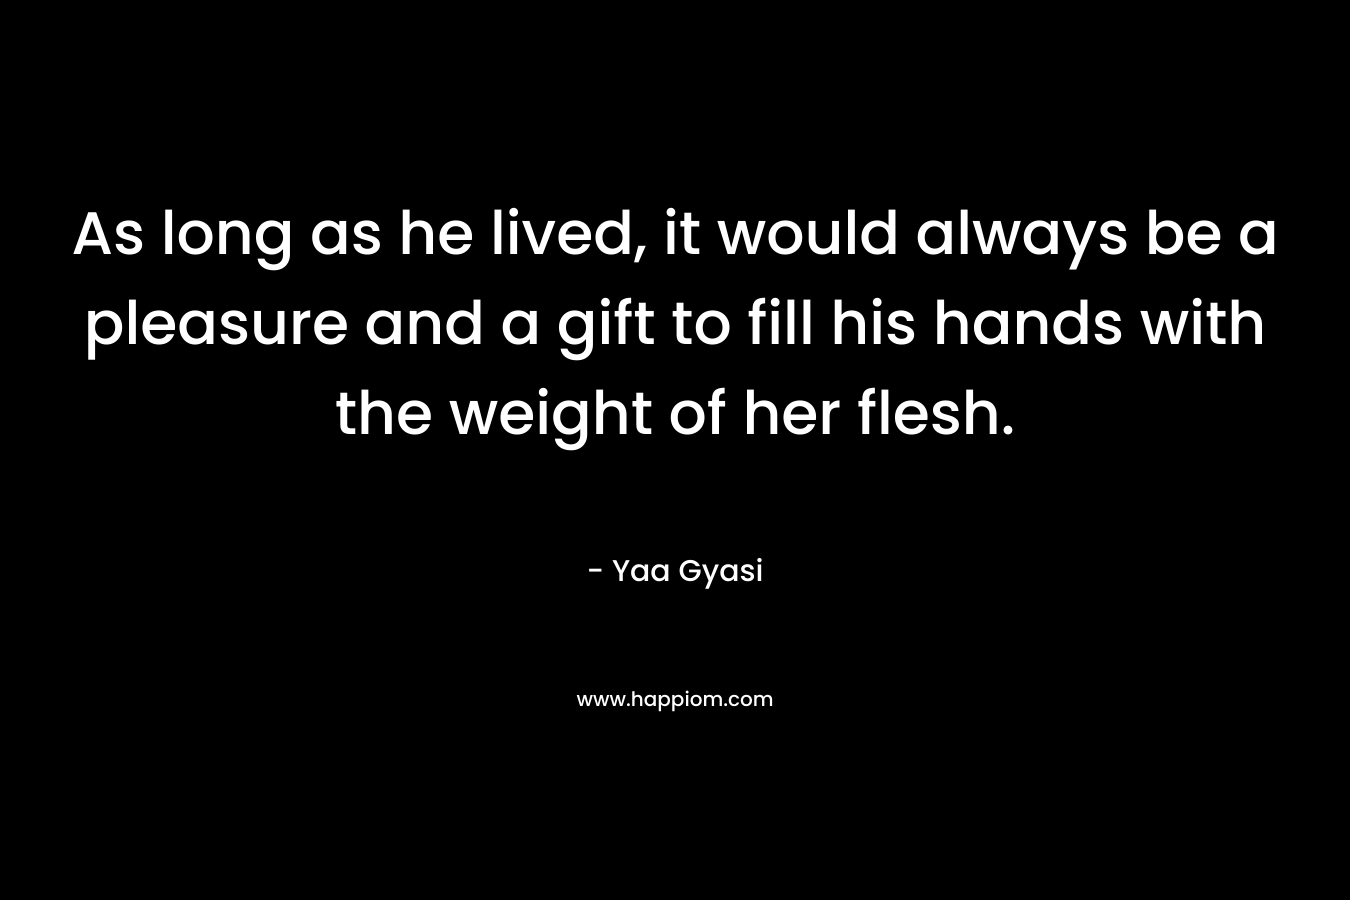 As long as he lived, it would always be a pleasure and a gift to fill his hands with the weight of her flesh.